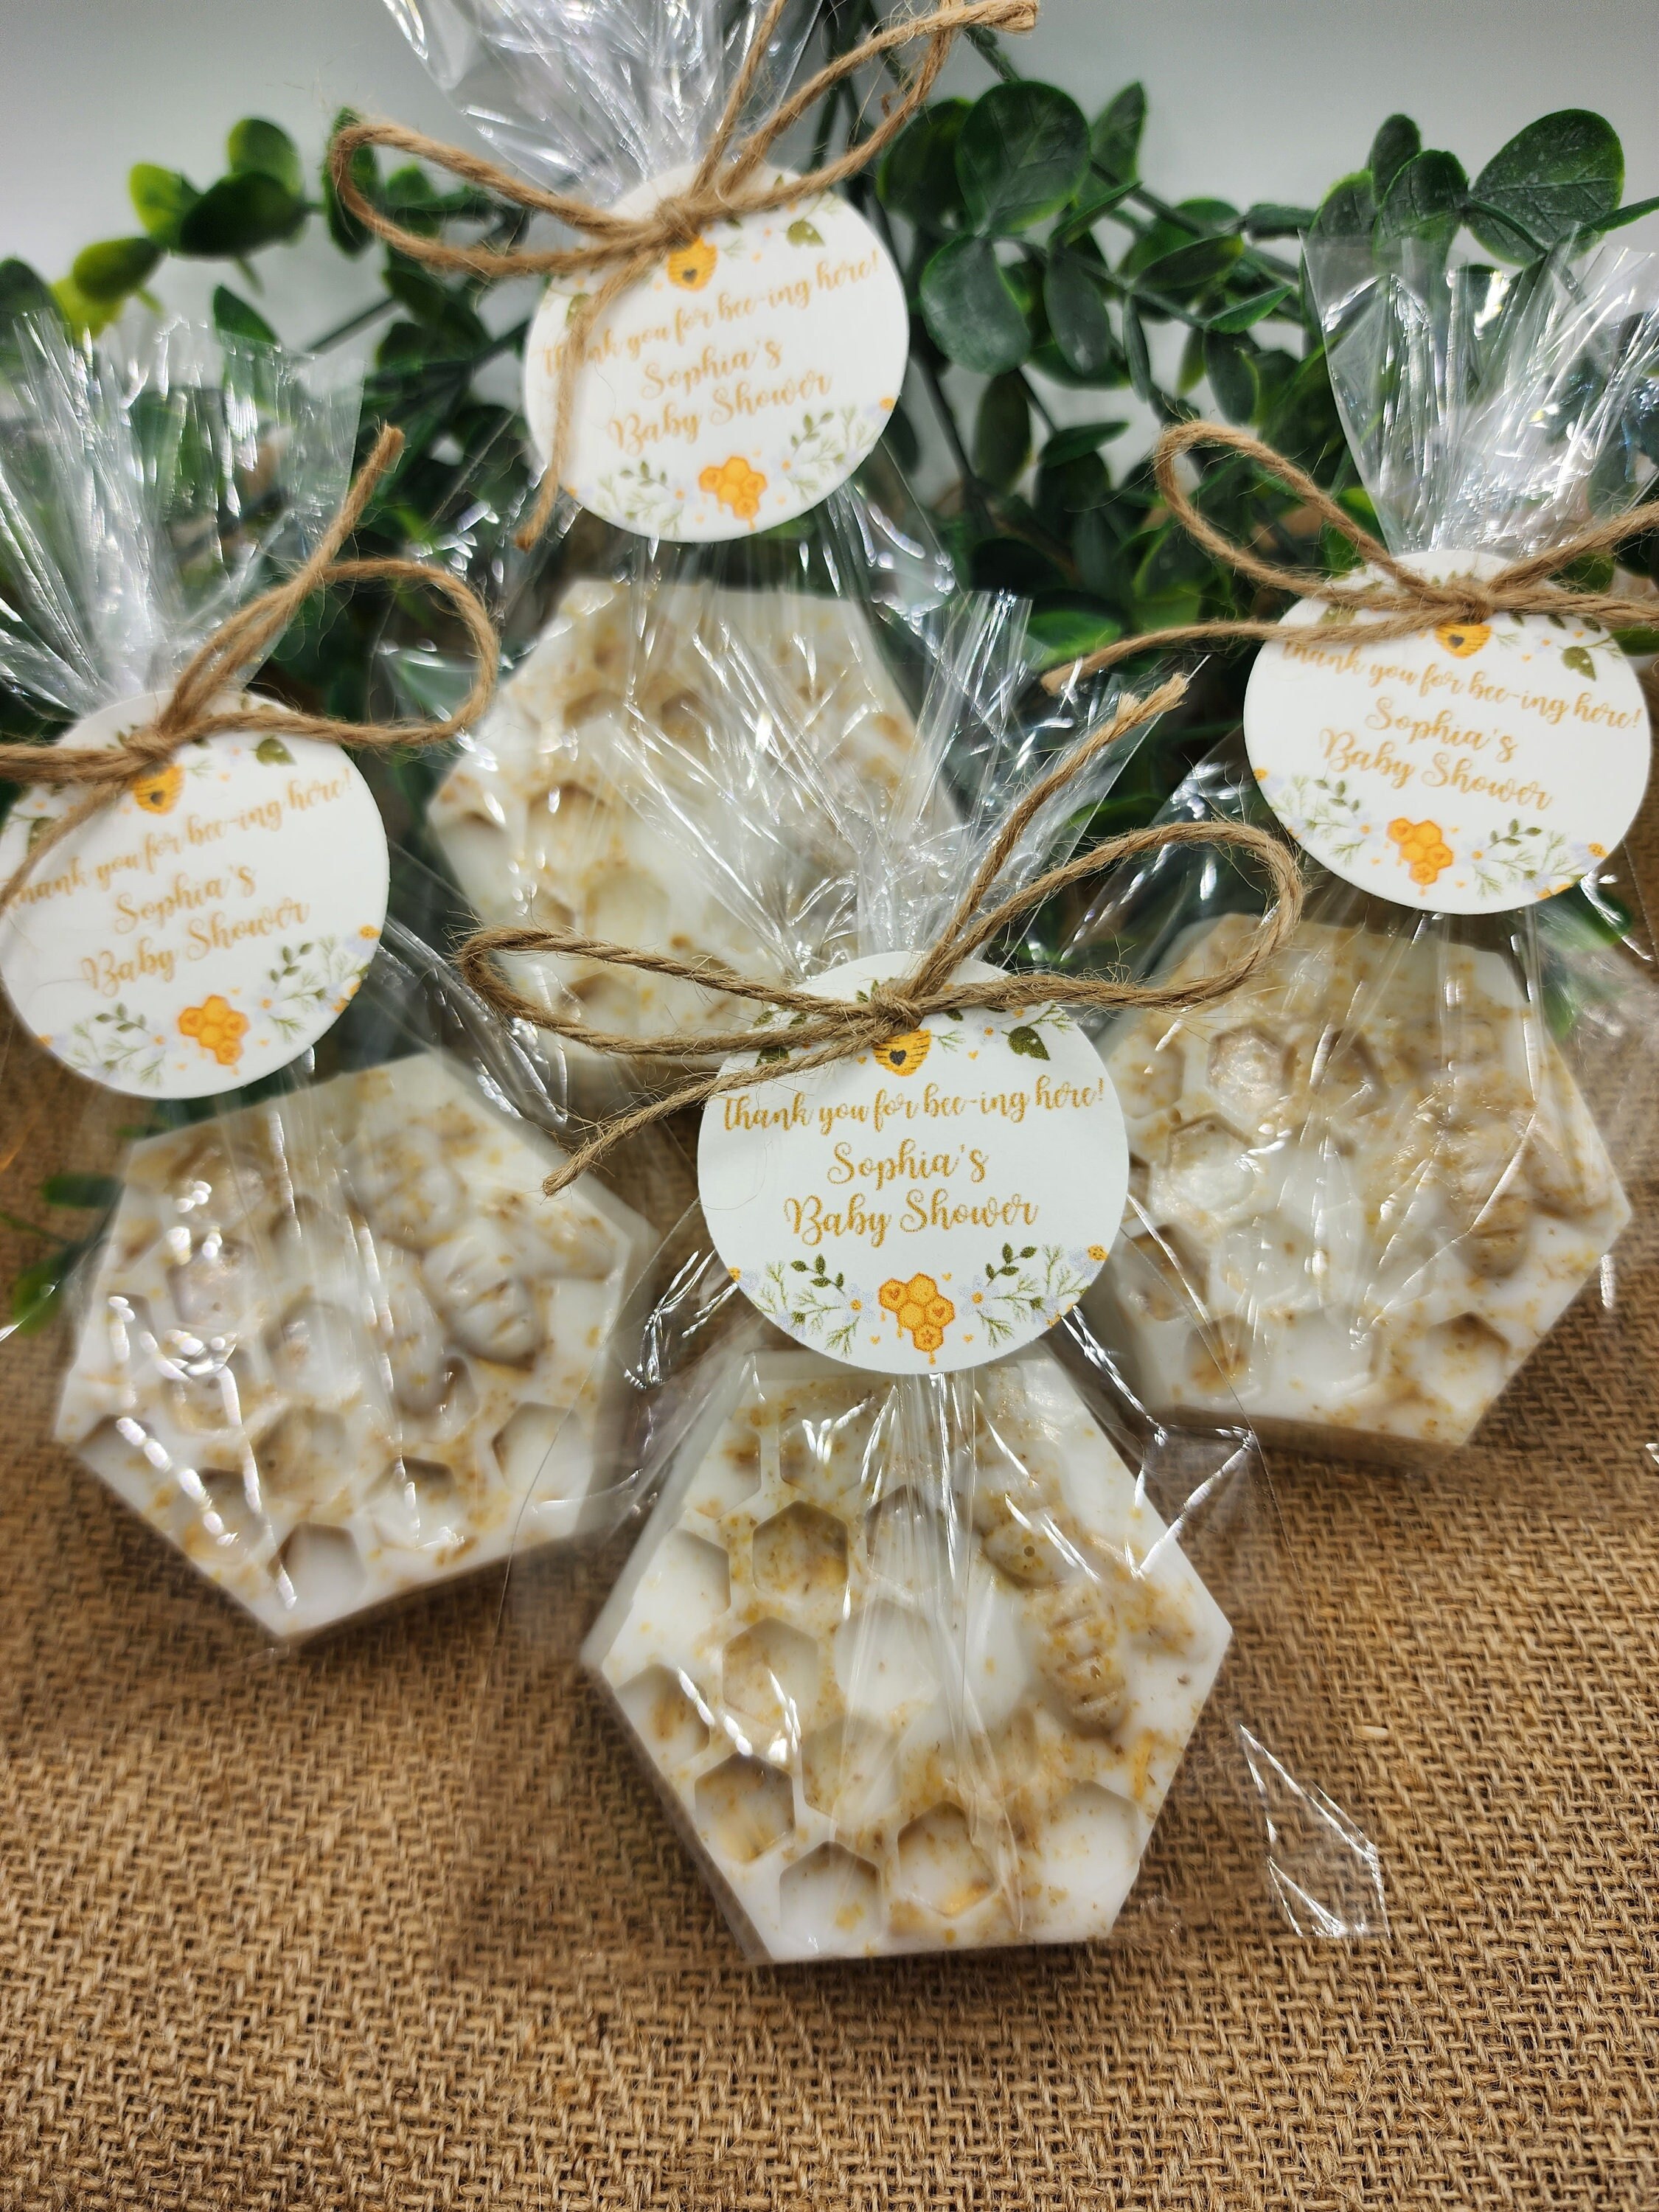 MTLEE 50 Pcs Bee Candle Favors Baby Shower Candle Favors Bee Party Favors  Wedding Party Favors Bridal Shower Favors Honey Combs Decor Honey Bee Decor